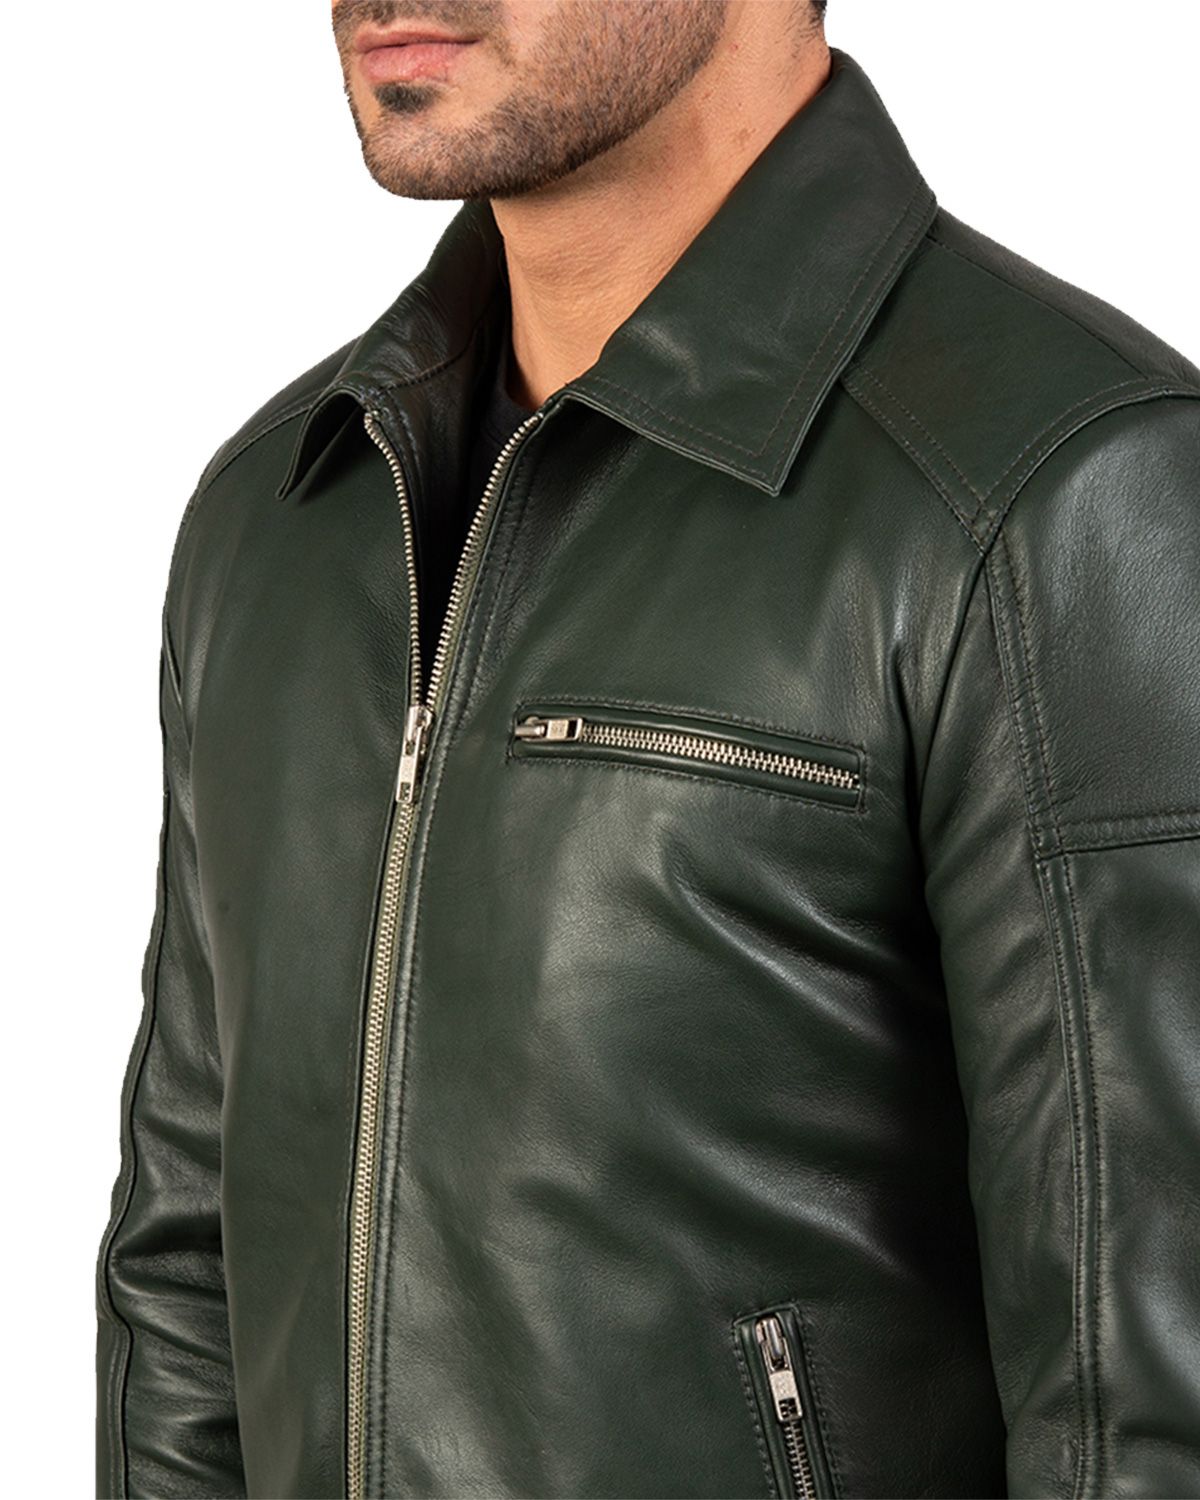 Green Leather Jacket For Mens 